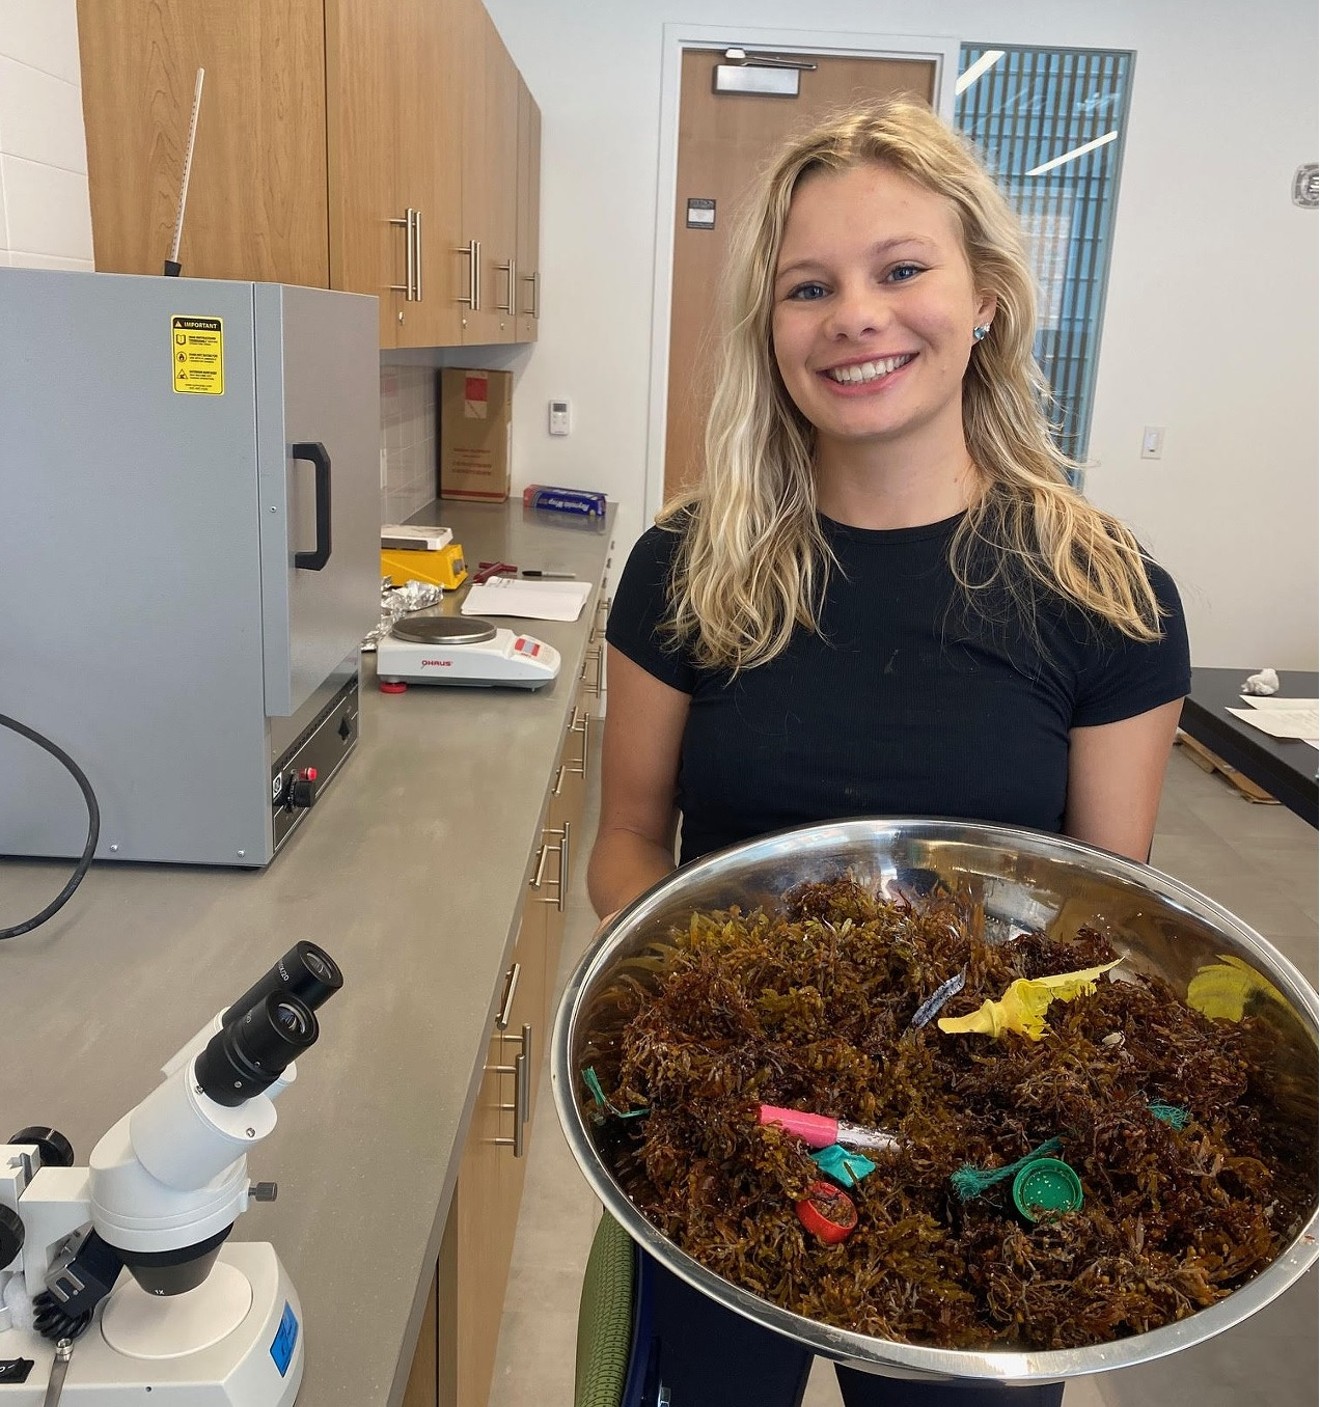 Over the last year, Stetson University student Charlotte Kraft has been looking into how much plastic is ending up in the sargassum washing ashore on Florida beaches.